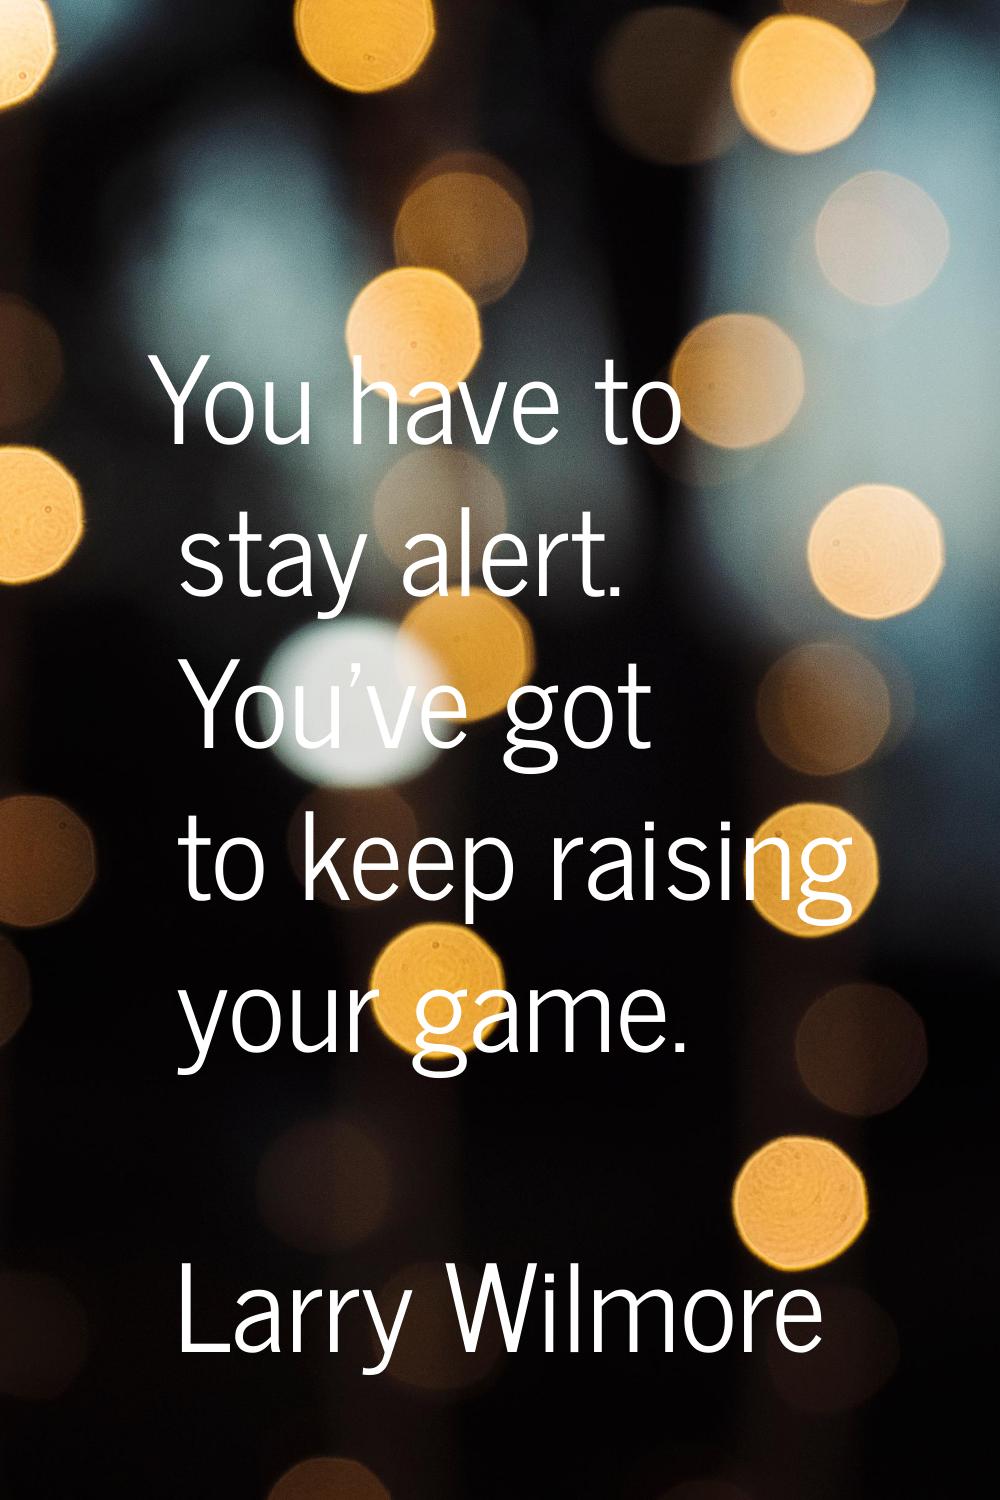 You have to stay alert. You've got to keep raising your game.